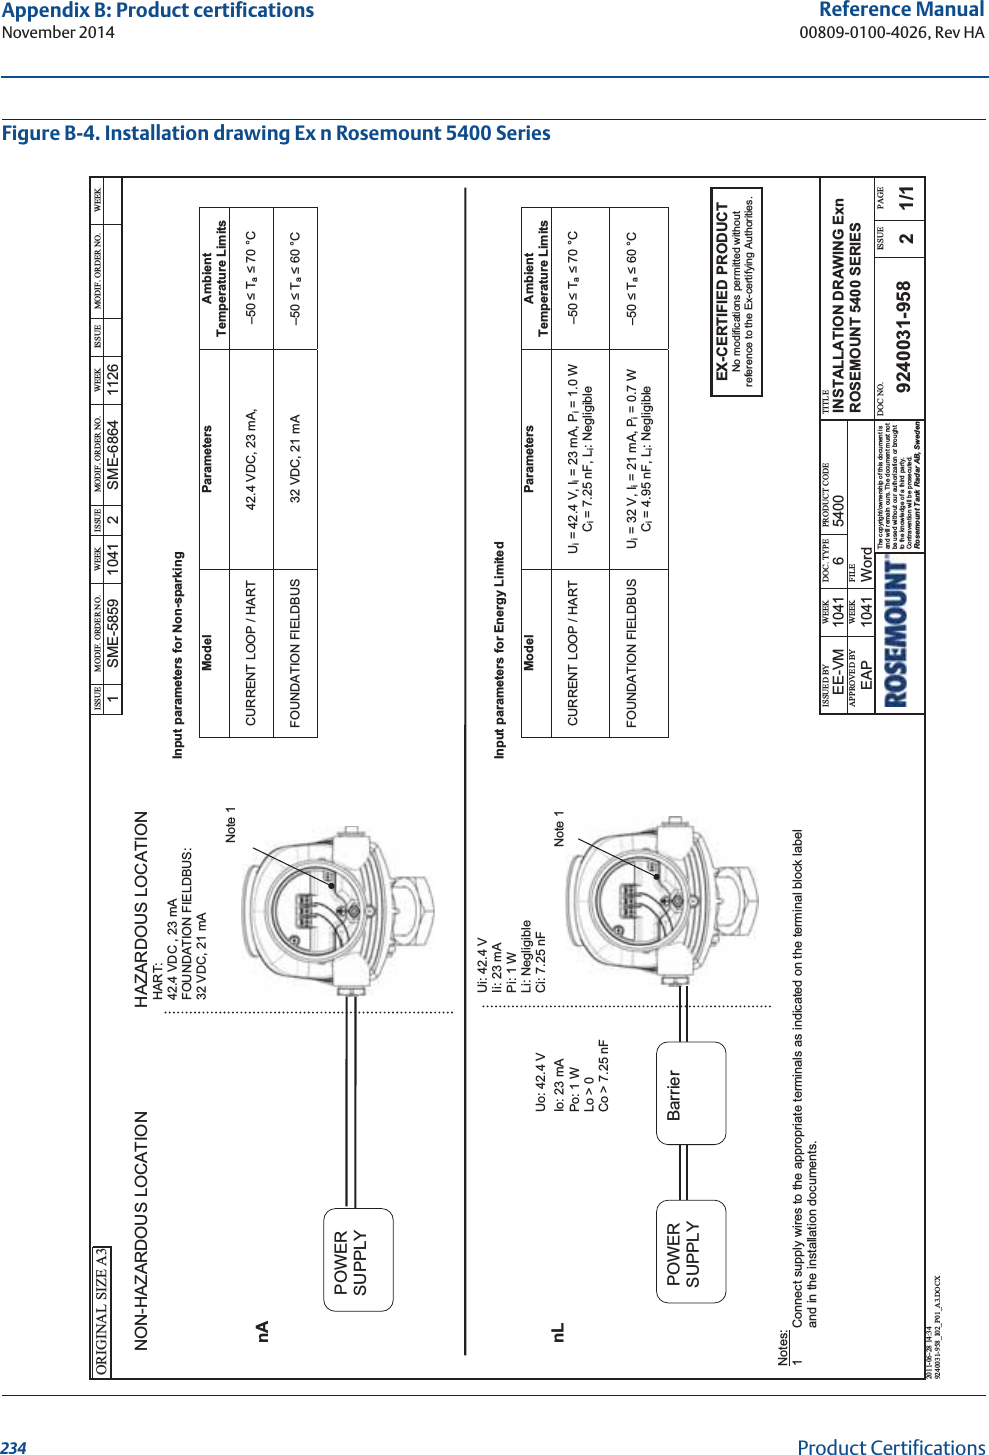 234Reference Manual00809-0100-4026, Rev HAAppendix B: Product certificationsNovember 2014Product CertificationsFigure B-4. Installation drawing Ex n Rosemount 5400 Series ORIGINAL SIZE A3  2011-06-28 14:34 9240031-958_I02_P01_A3.DOCX ISSUE MODIF. ORDER NO. WEEK ISSUE MODIF. ORDER NO. WEEK ISSUE MODIF. ORDER NO. WEEK 1 SME-5859 1041 2 SME-6864 1126                         ISSUED BY WEEK DOC. TYPE PRODUCT CODE TITLE EE-VM 1041 6 5400 INSTALLATION DRAWING Exn ROSEMOUNT 5400 SERIES APPROVED BY WEEK FILE EAP 1041 Word      The copyright/ownership of this document is and will remain ours. The document must not be used without our authorization or brought to the knowledge of a third party. Contravention will be prosecuted. Rosemount Tank Radar AB, Sweden DOC NO. ISSUE PAGE 9240031-958 2 1/1    NON-HAZARDOUS LOCATION  HAZARDOUS LOCATION    HART:      42.4 VDC , 23 mA   FOUNDATION FIELDBUS:     32 VDC, 21 mA   Note 1     nA                 Ui: 42.4 V   Ii: 23 mA  Pi: 1 W   Li: Negligible   Uo: 42.4 V  Ci: 7.25 nF nL Io: 23 mA                                                            Note 1   Po: 1 W  Lo &gt; 0  Co &gt; 7.25 nF            Notes:  1  Connect supply wires to the appropriate terminals as indicated on the terminal block label and in the installation documents.            Input parameters for Non-sparking   Model Parameters Ambient Temperature Limits  CURRENT LOOP / HART  42.4 VDC, 23 mA,    –50 ≤ Ta ≤ 70 °C  FOUNDATION FIELDBUS  32 VDC, 21 mA   –50 ≤ Ta ≤ 60 °C             Input parameters for Energy Limited  Model Parameters Ambient Temperature Limits  CURRENT LOOP / HART  Ui = 42.4 V, Ii = 23 mA, Pi = 1.0 W Ci = 7.25 nF, Li: Negligible   –50 ≤ Ta ≤ 70 °C  FOUNDATION FIELDBUS  Ui = 32 V, Ii = 21 mA, Pi = 0.7 W Ci = 4.95 nF, Li: Negligible    –50 ≤ Ta ≤ 60 °C    POWER SUPPLY EX-CERTIFIED PRODUCT No modifications permitted without reference to the Ex-certifying Authorities. POWER SUPPLY Barrier  